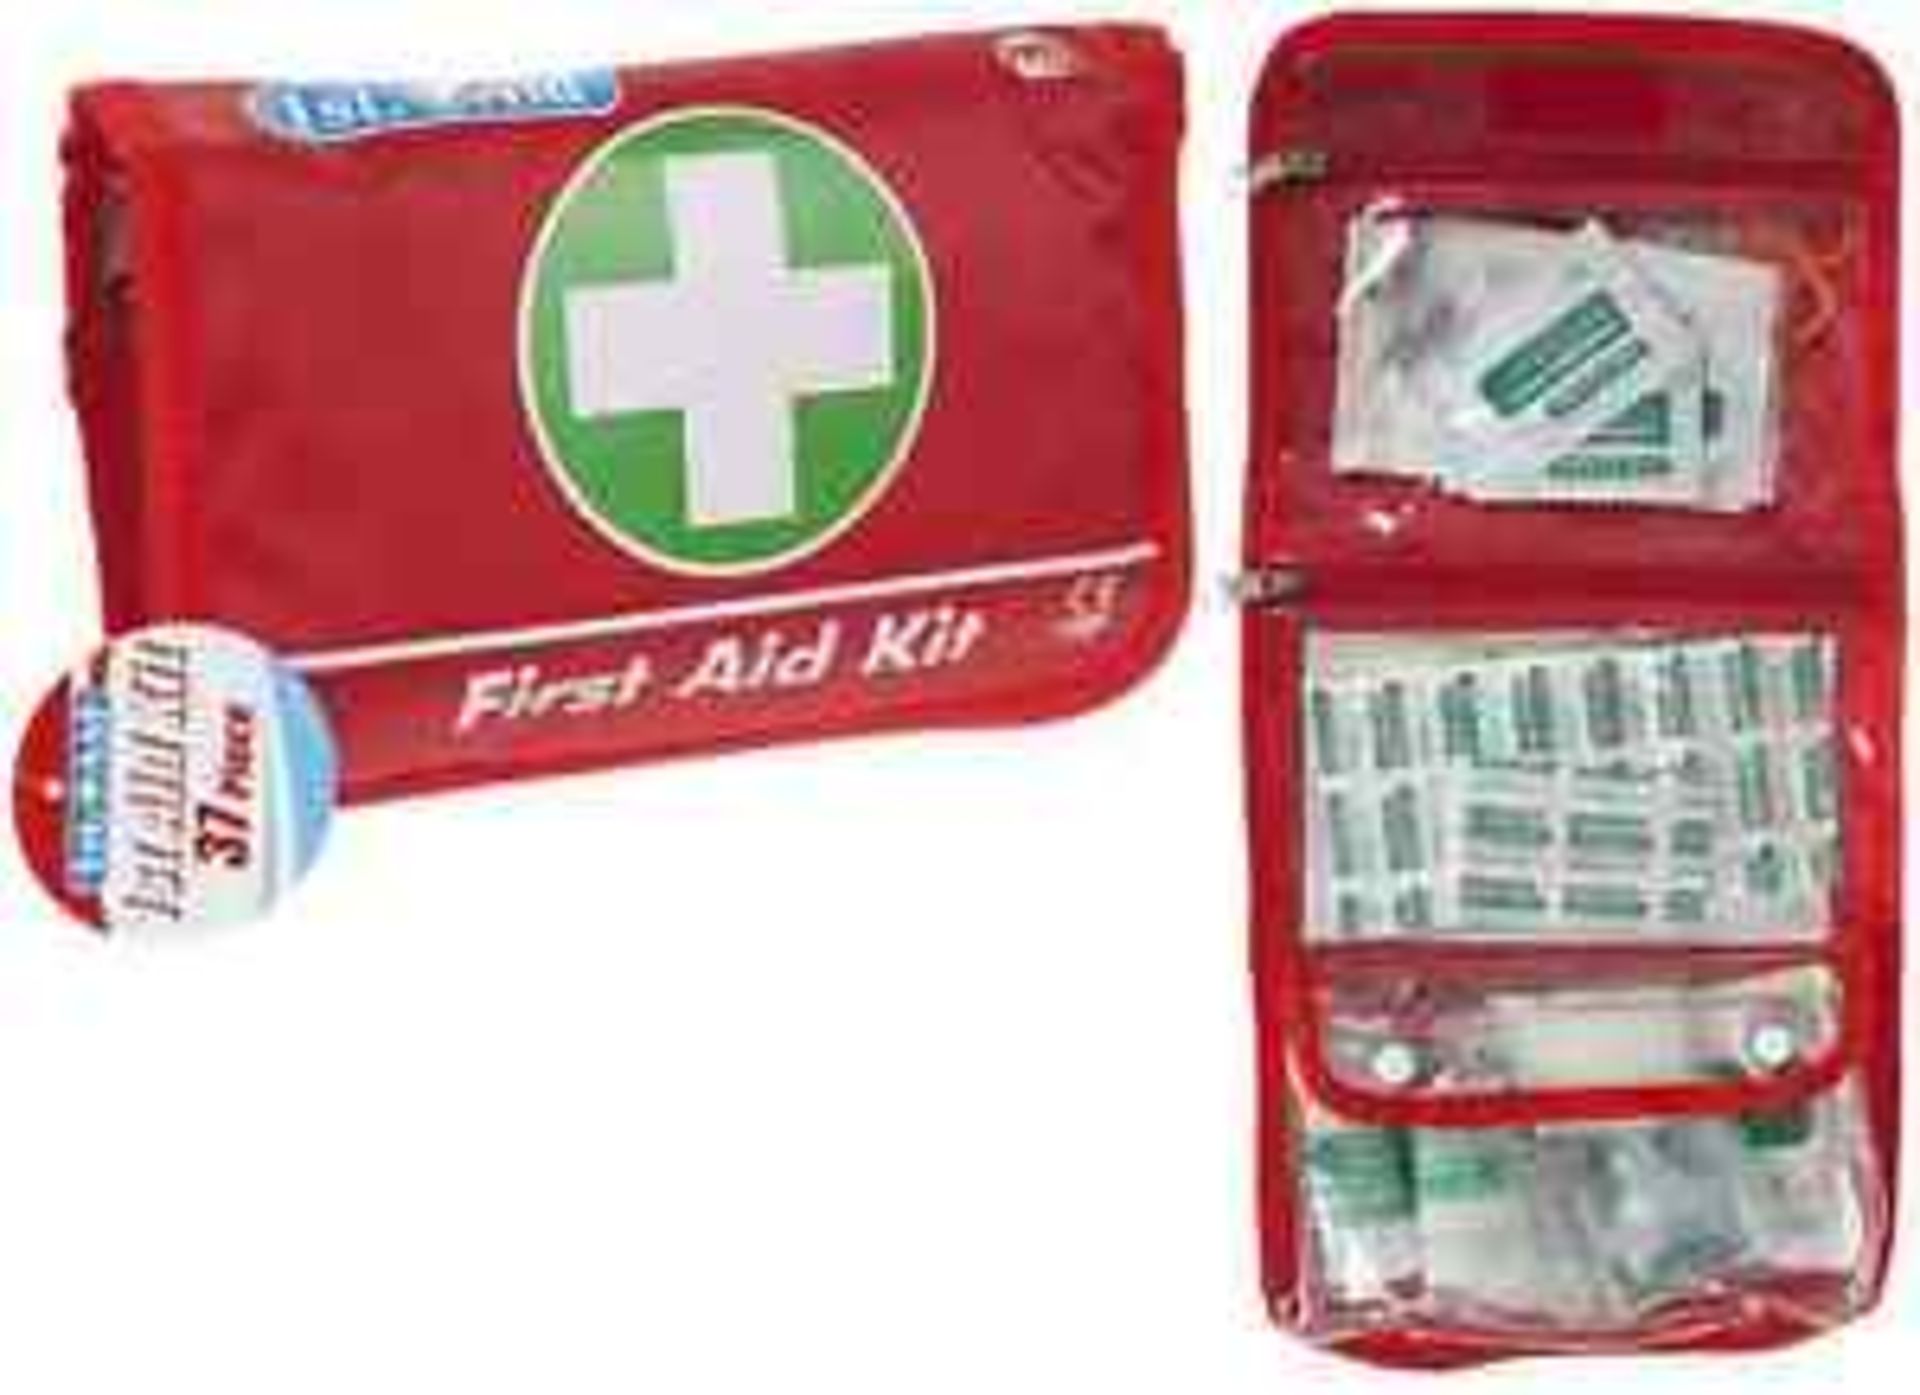 V *TRADE QTY* Brand New 37 Piece First Aid Kit In Pouch X 3 YOUR BID PRICE TO BE MULTIPLIED BY